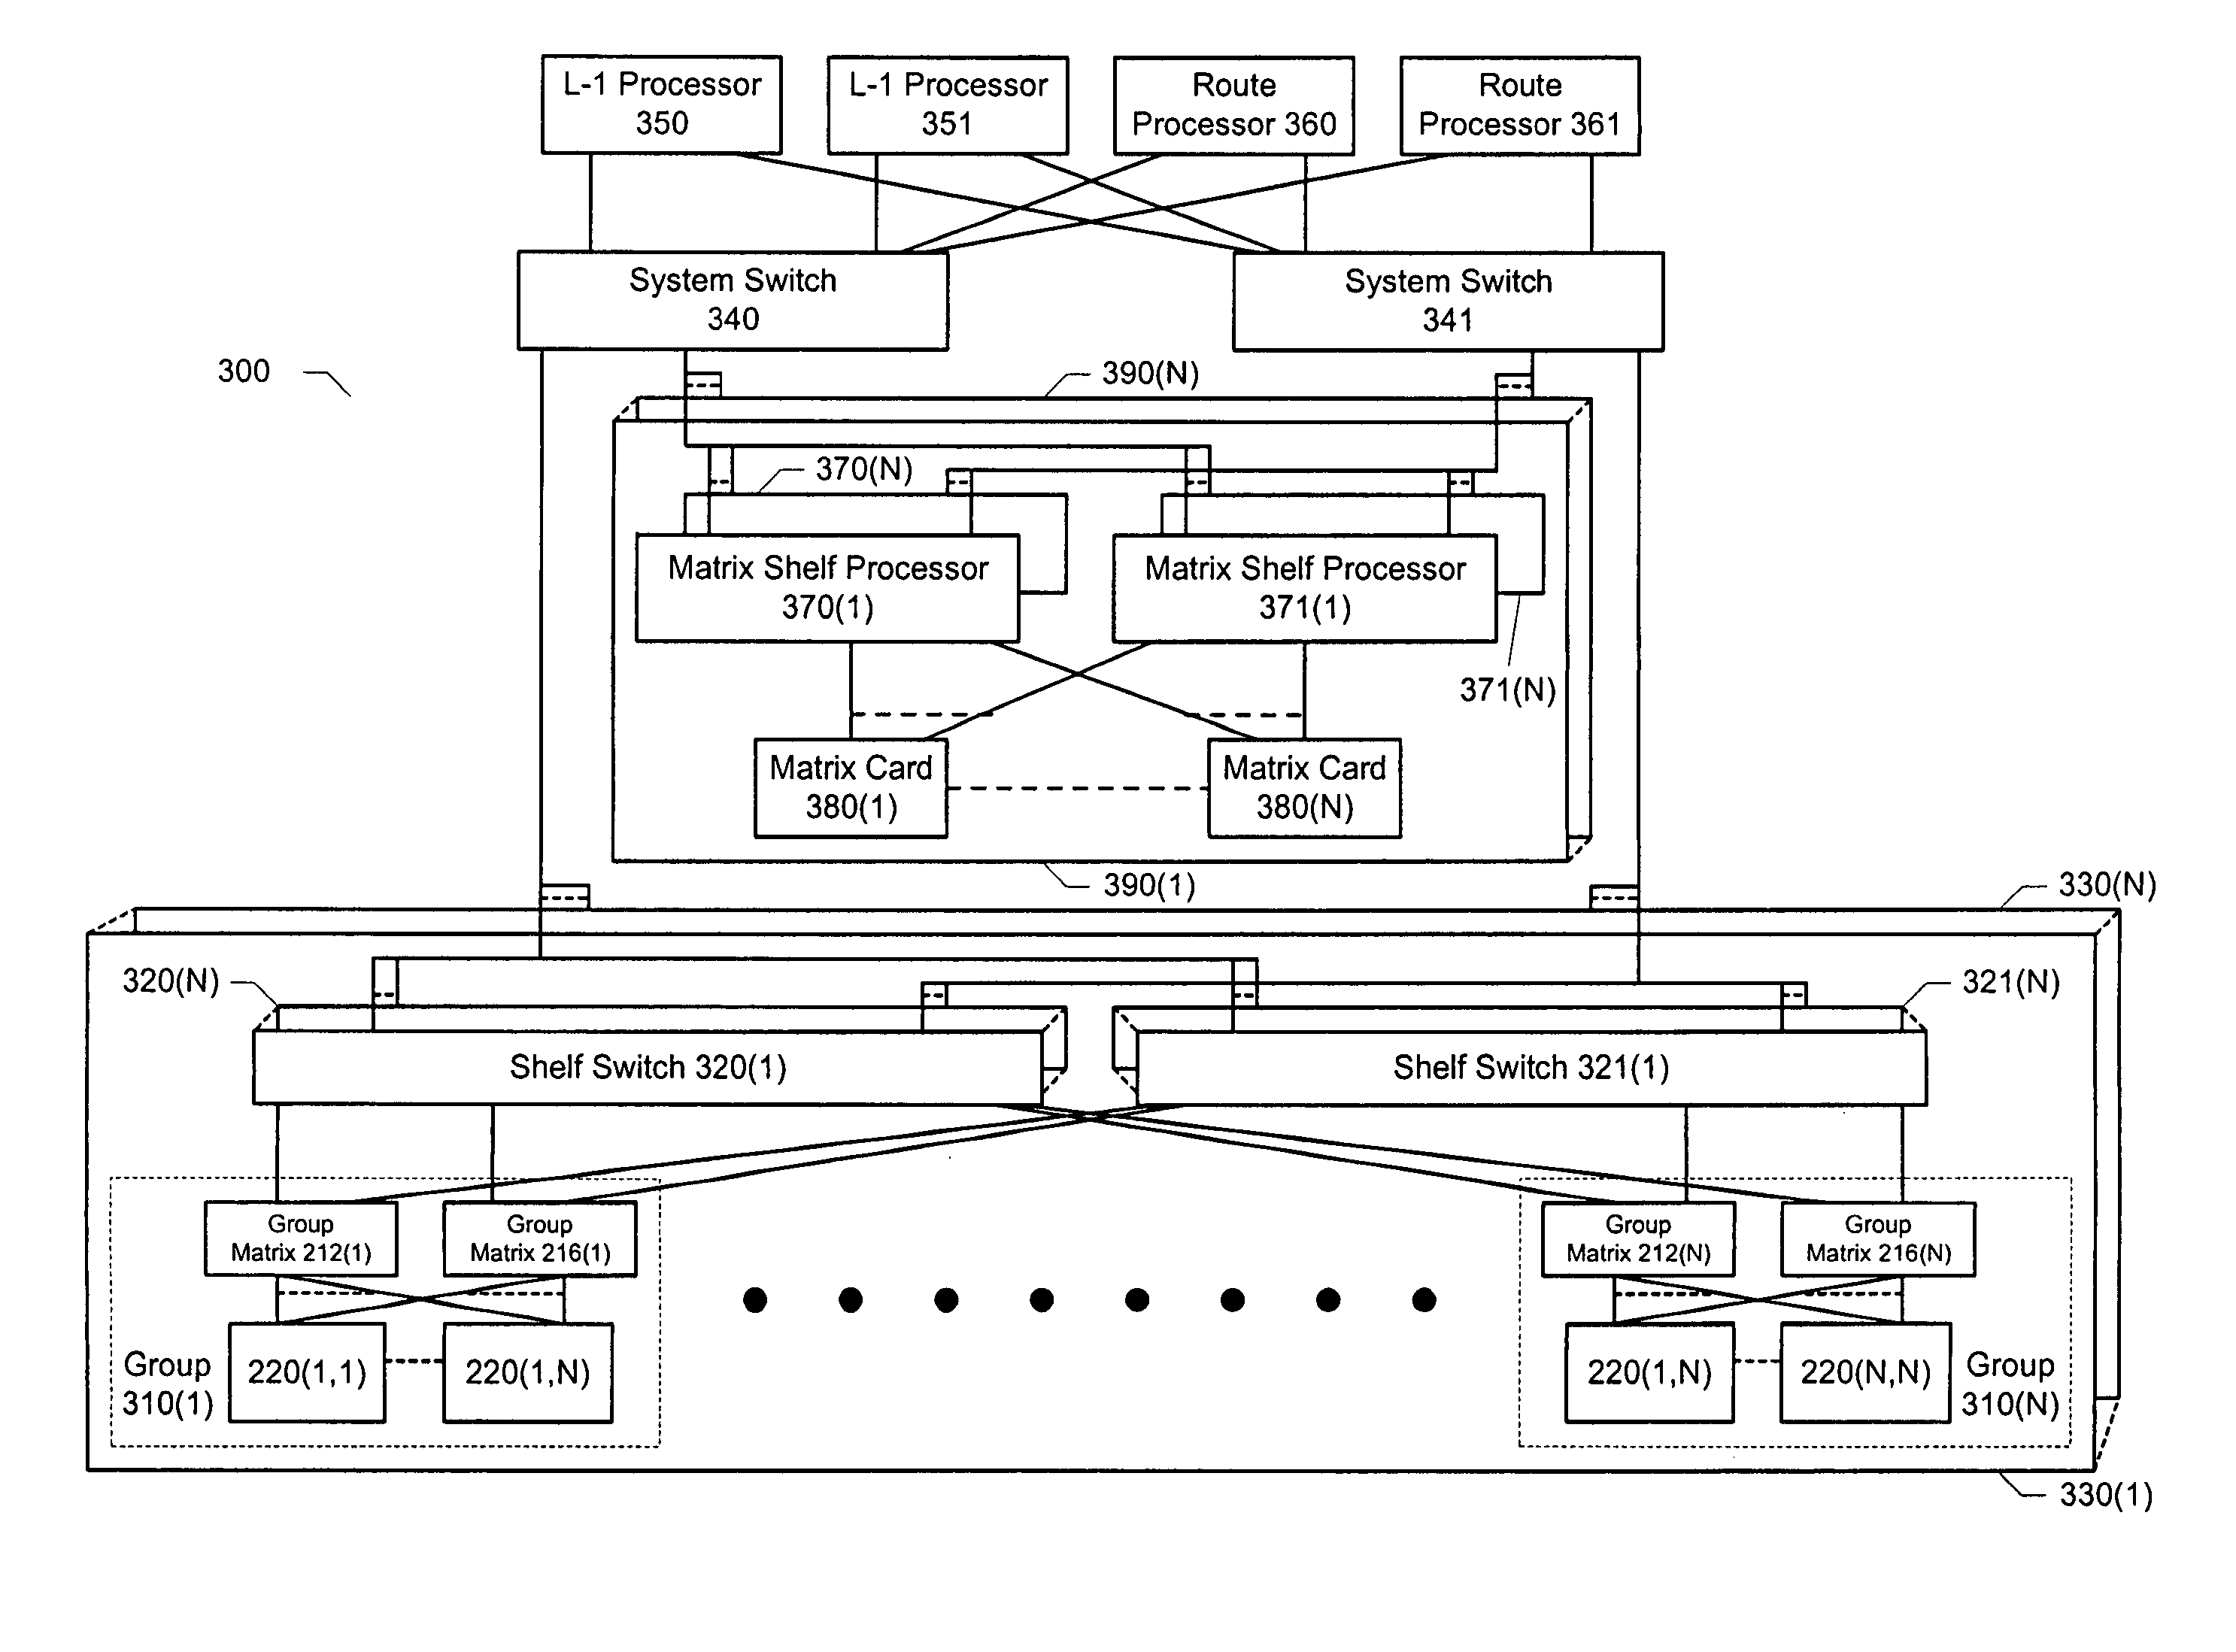 Method of providing network services